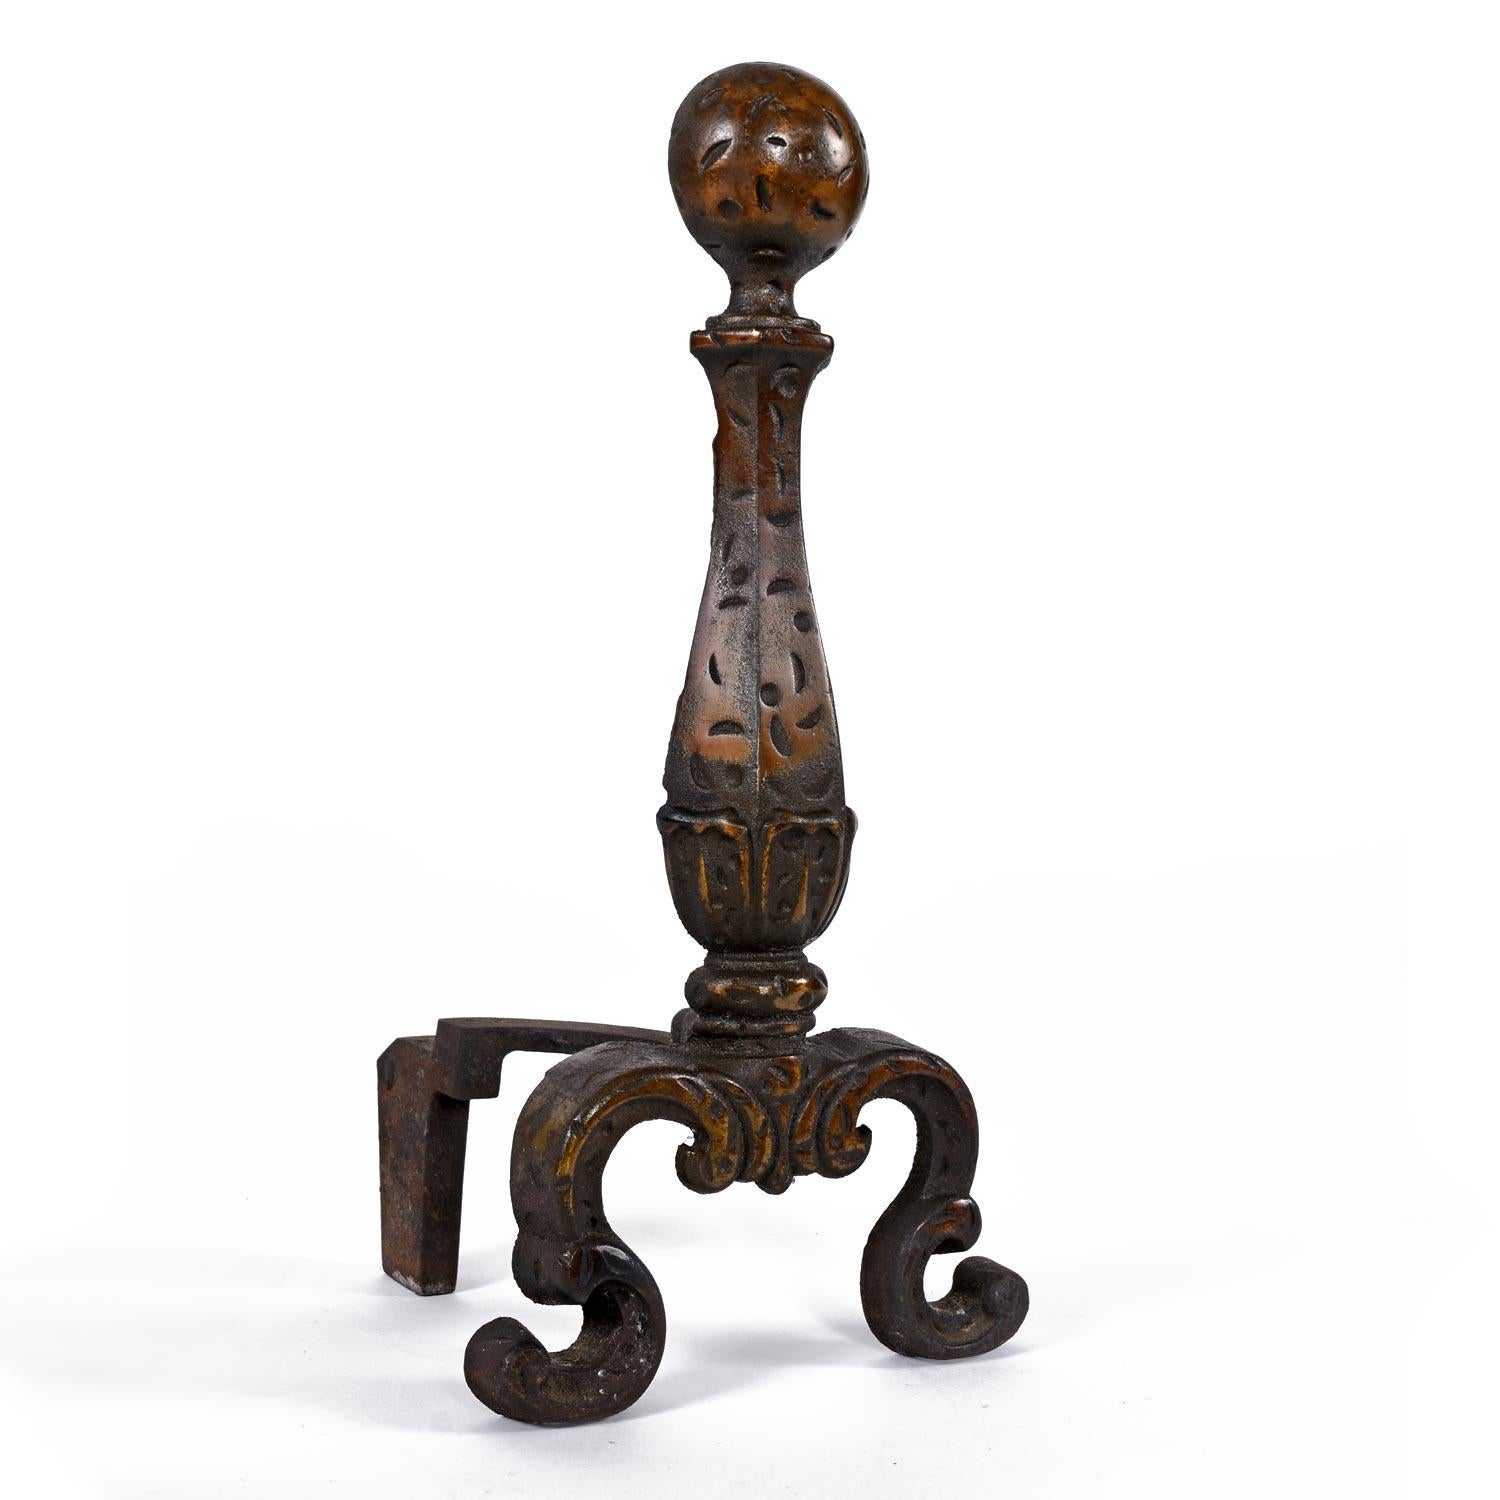 Handsome pair of mid-20th Century hammered texture andirons. The andirons are in traditional form with the hourglass body balanced on elegantly curved legs. A round cannonball shape crowns the andirons. The wrought iron andirons have a decorative